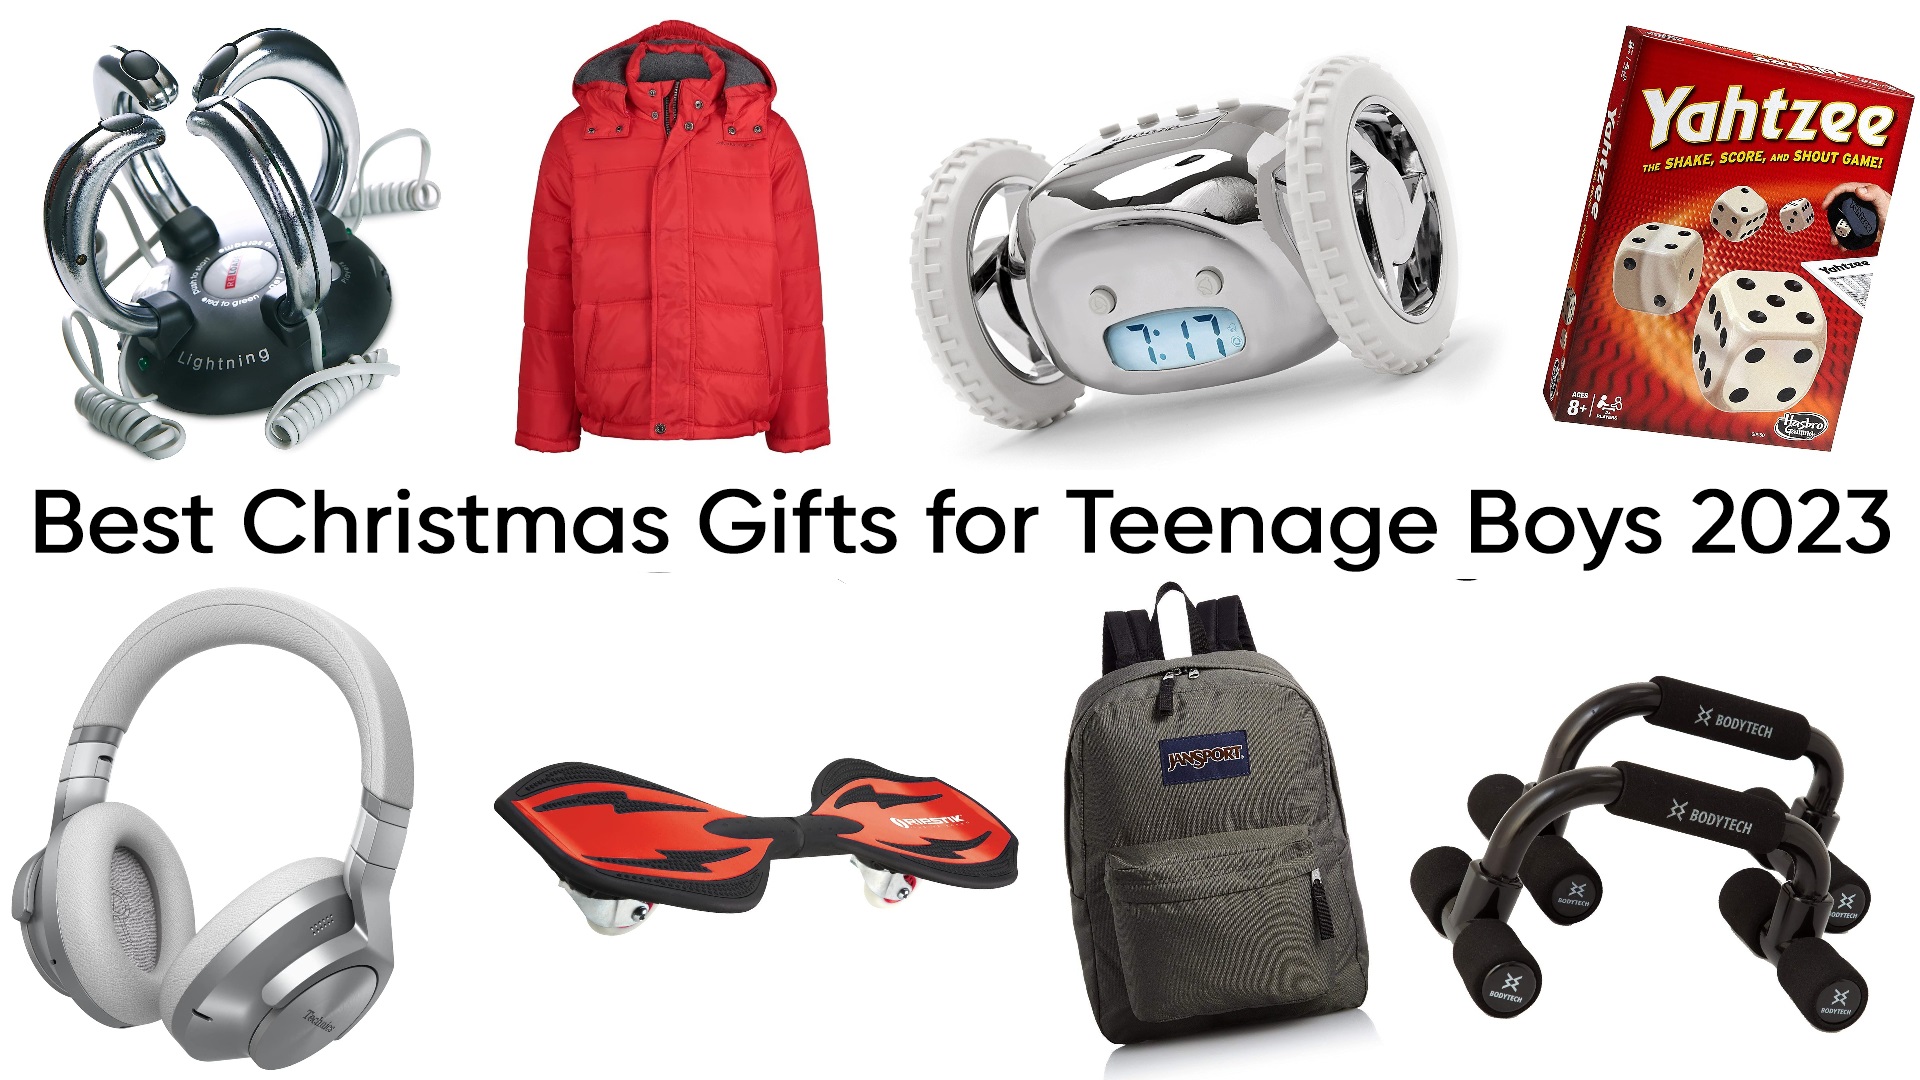 Best Christmas Gifts for Teenage Boys 2023